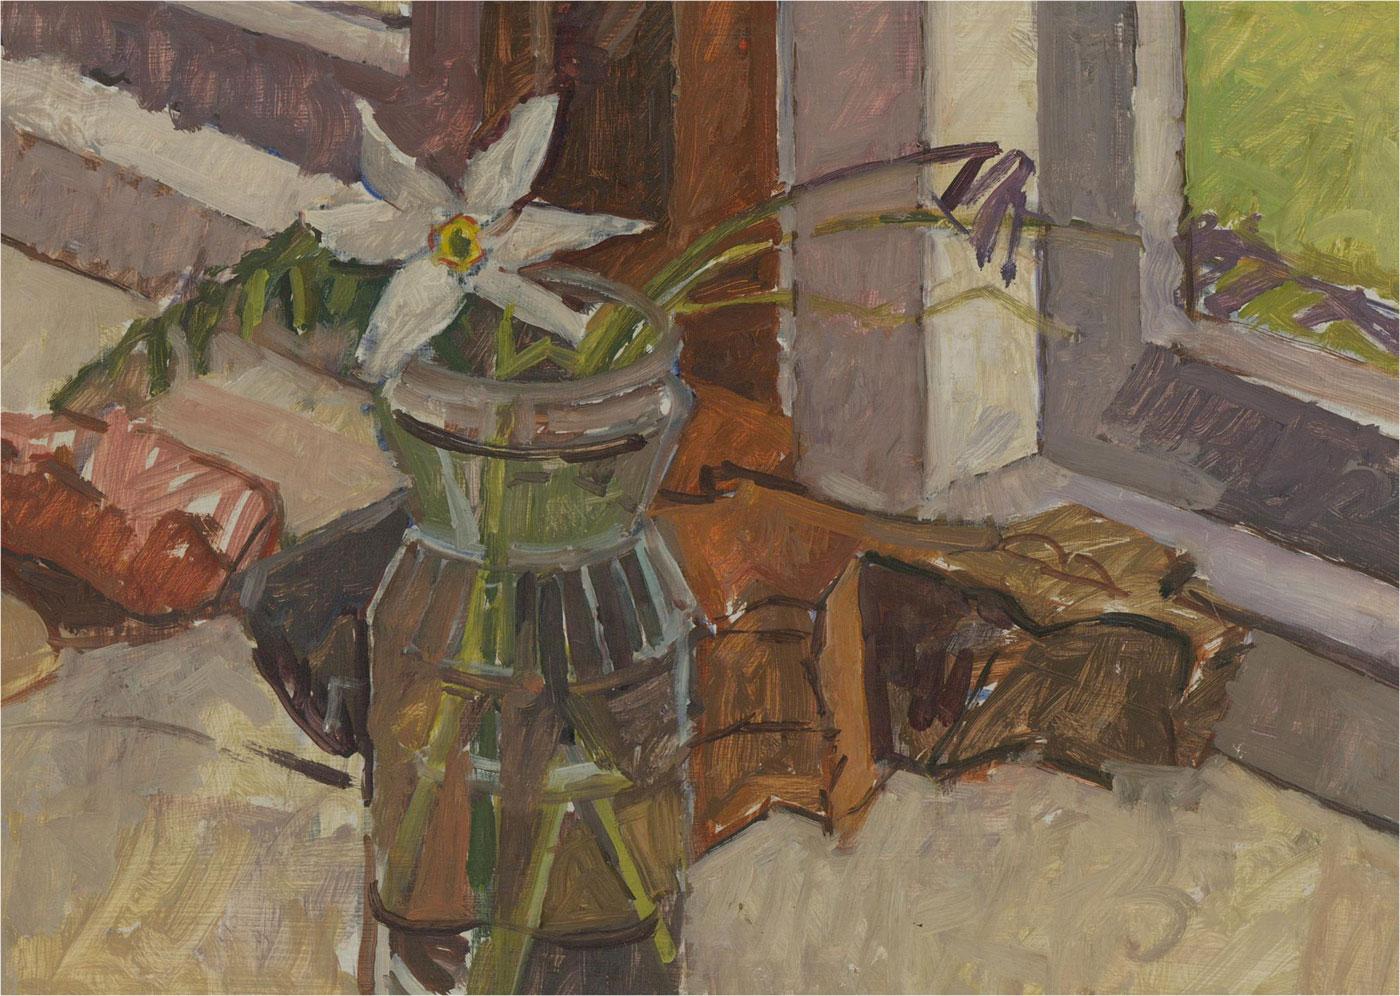 A fine and accomplished oil painting by Roger Bliss, depicting an interior still life scene with a white flower by a window. Unsigned. There are two artist's studio stamps on the reverse. Well-presented in a gilt-effect slip and in a dark wooden